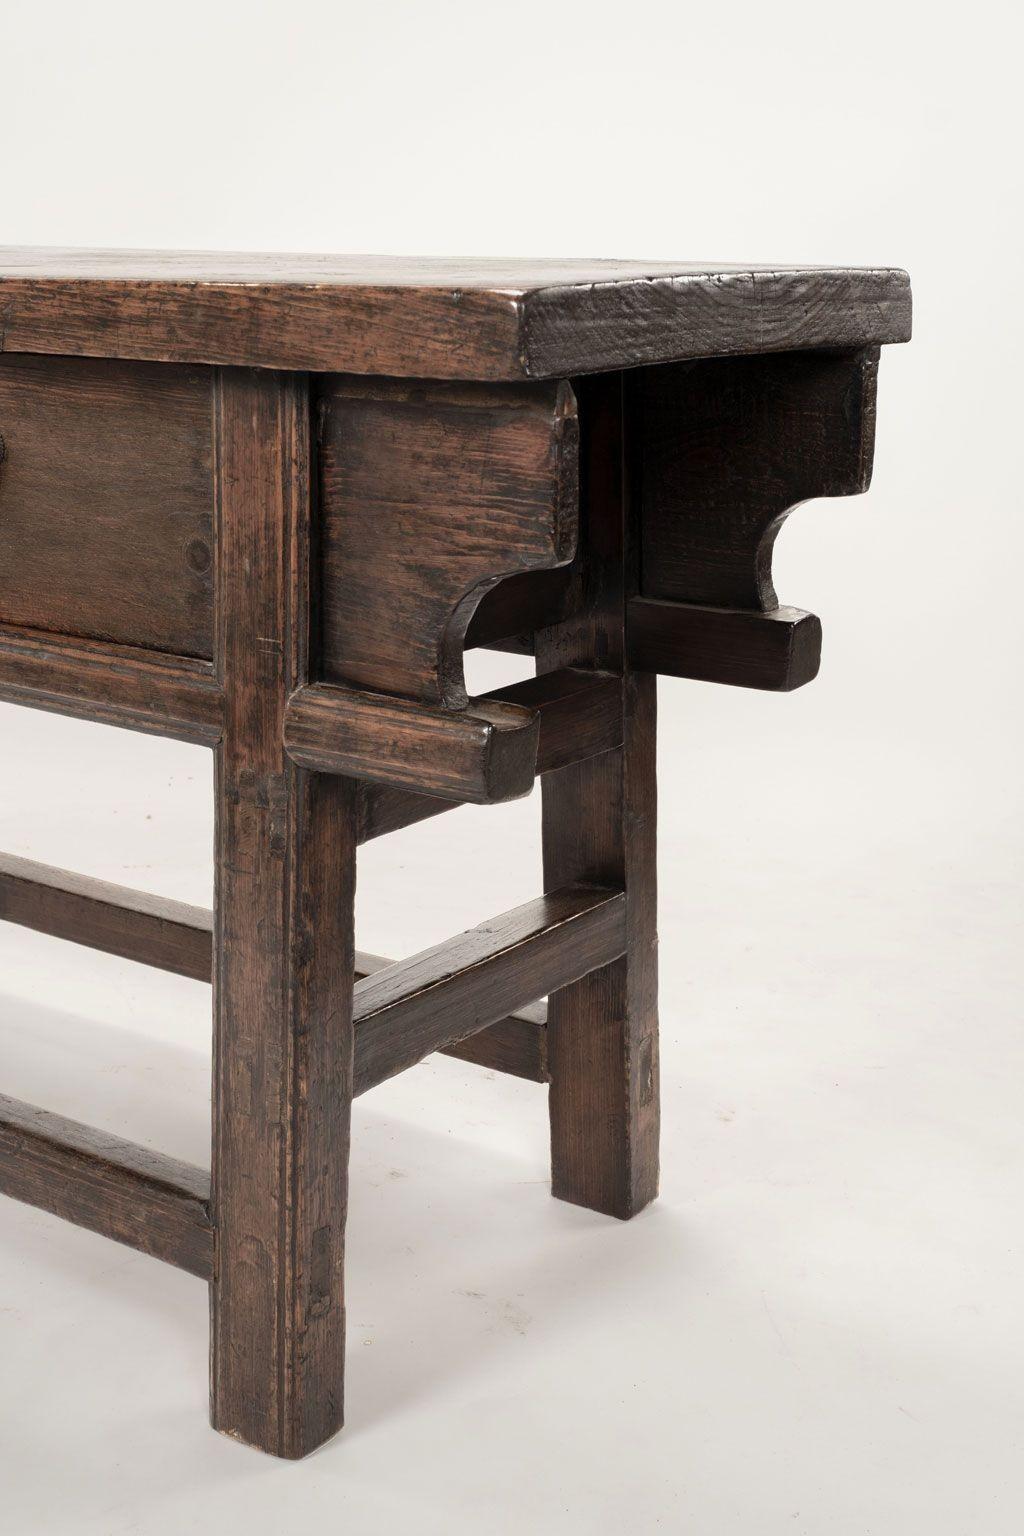 18th century French walnut console table in Chinese style, constructed circa 1780. Hand-carved in walnut wood with mortise and tenon construction. Two drawers and a single two-door compartment. Nice long, thick plank top.